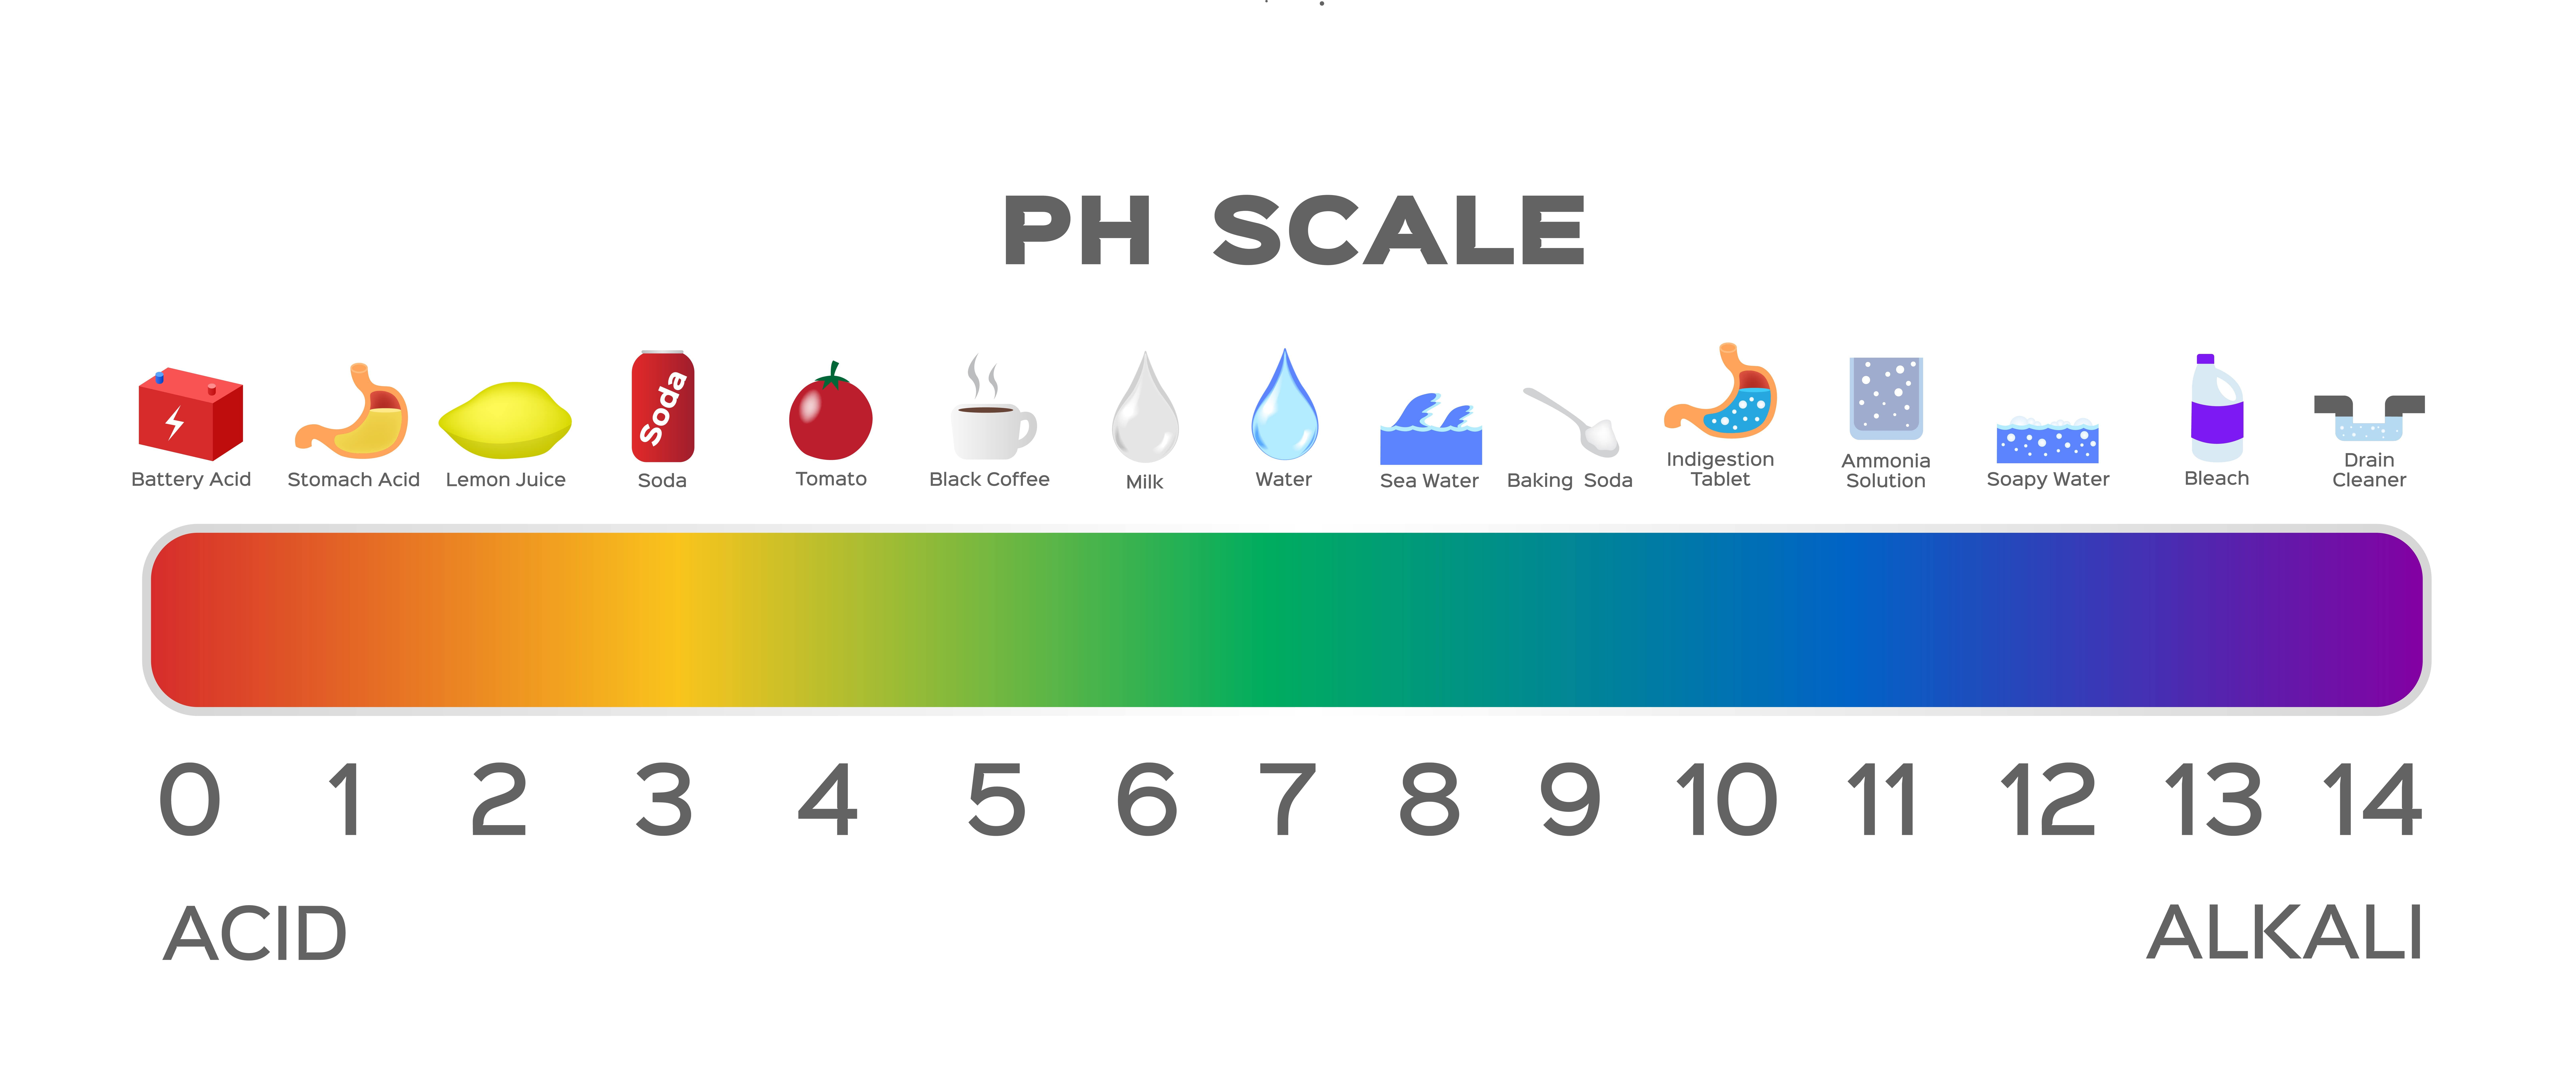 image of a pH scale